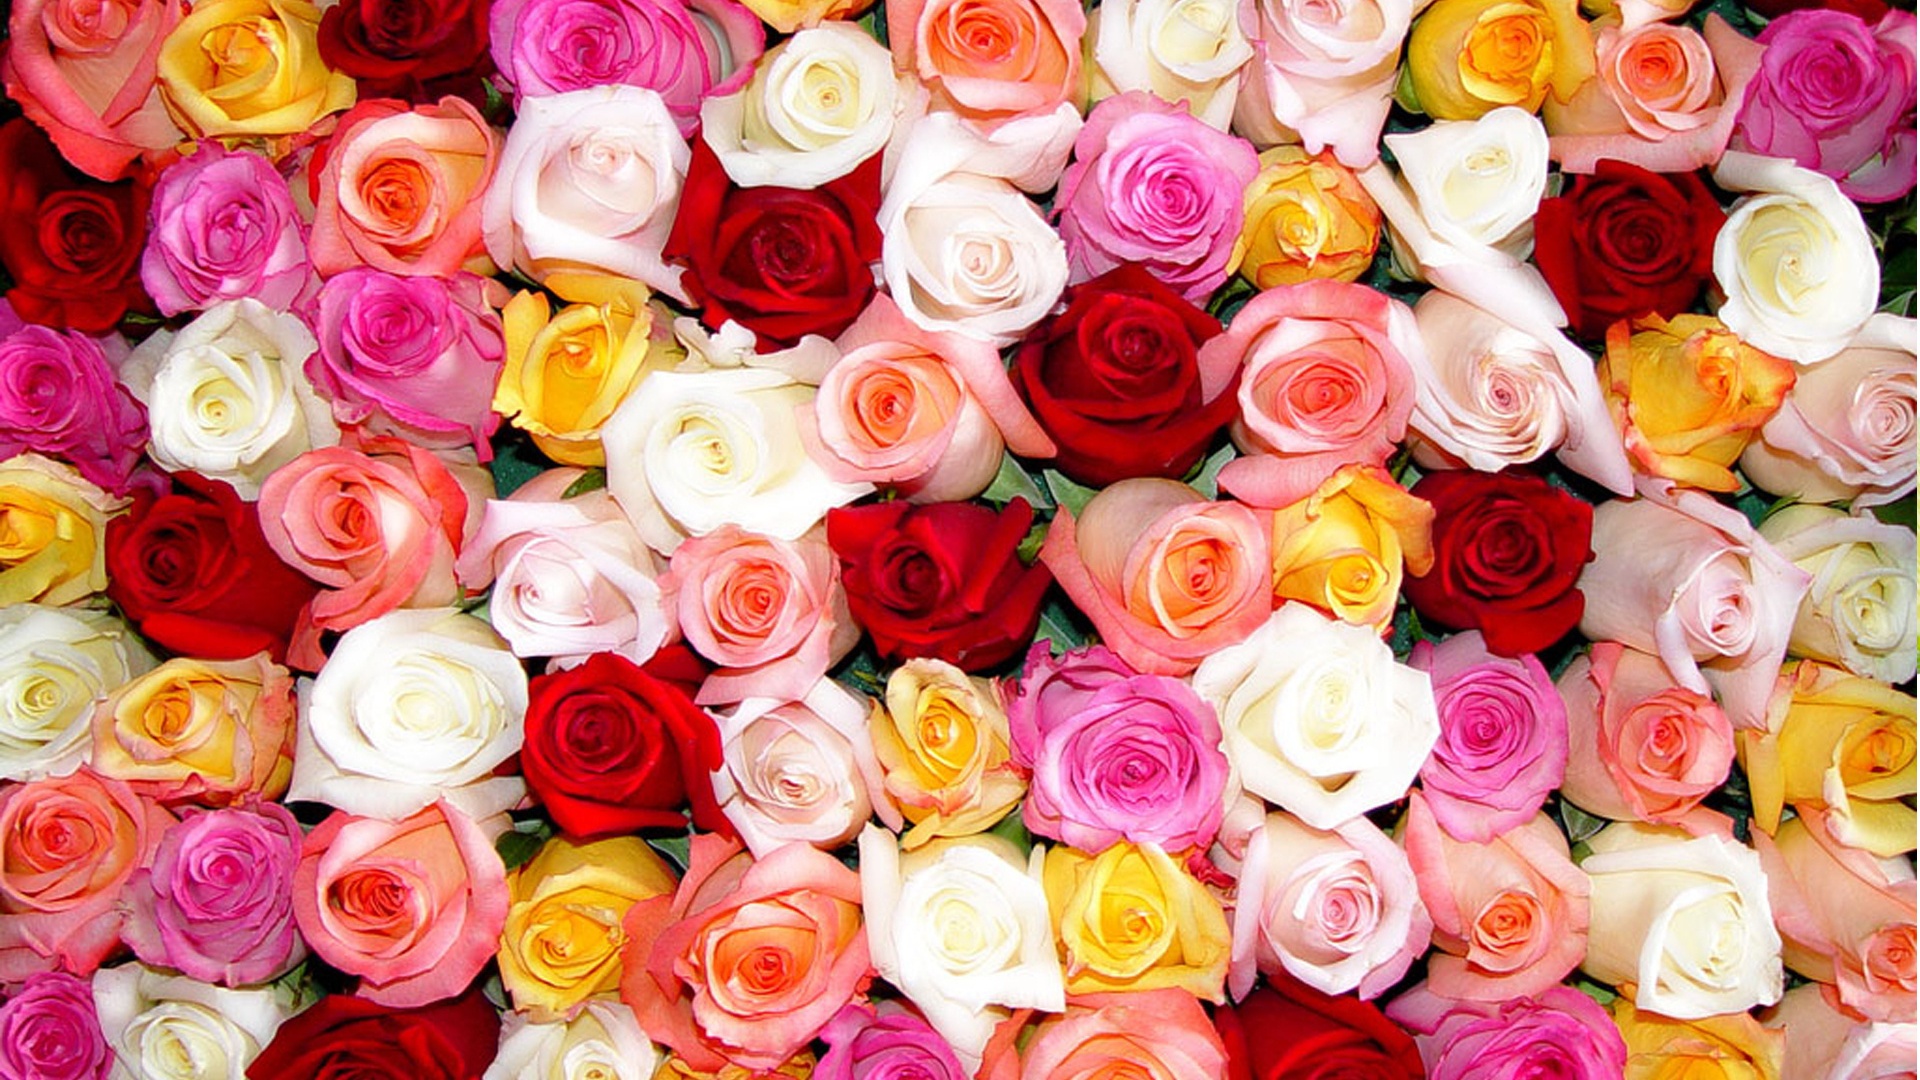 Multi Colored Roses   Wallpaper High Definition High Quality